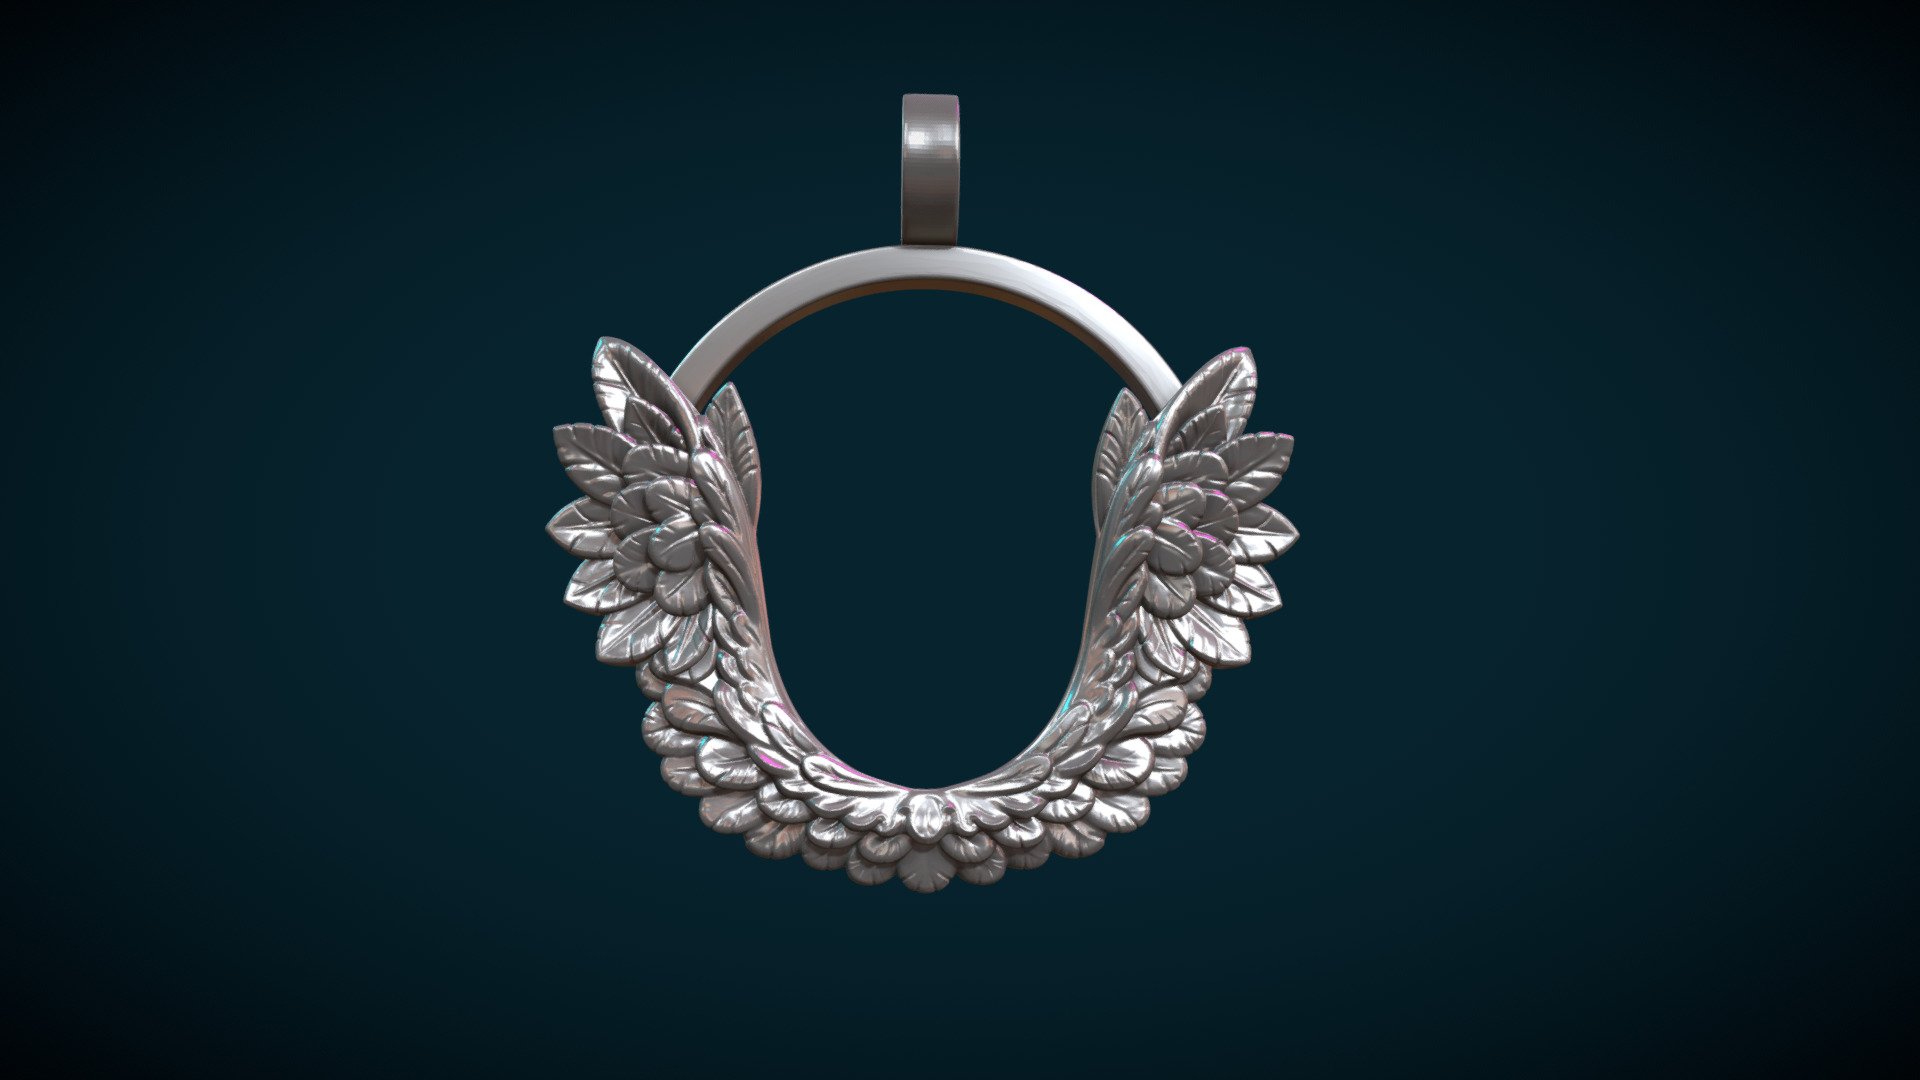 Print ready wings relief. (wings and wings pendant)

Measure units are millimeters, the figure is about 4.5 cm in width.

Mesh is manifold, no holes, no inverted faces, no bad contiguous edges.

Available formats: .blend, .stl, .obj, .fbx, .dae

Here is two versions of the model:

1) WingsX_sld. (blend, .obj, .fbx, .dae. stl) This files contain solid version of the model. The model consists of 398136 triangular faces.

2) WingsX_hlw. (blend, .obj, .fbx, .dae. stl) Here is hollow version of the model. The model consists of 424276 triangular faces.

The bail and the halo(arc) are the separate parts in all versions 3d model